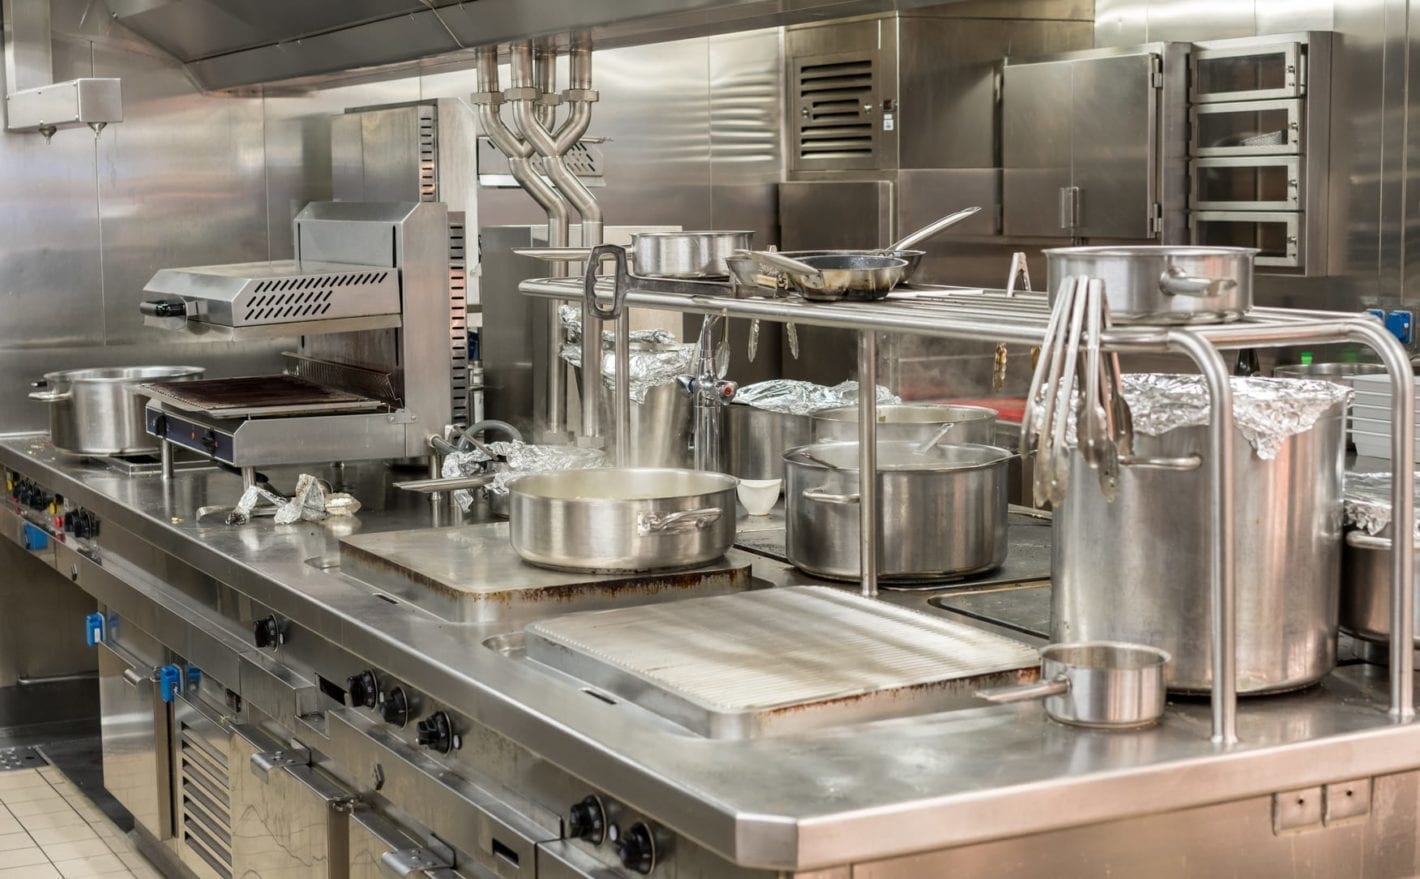 stainless-steel-commercial-kitchen